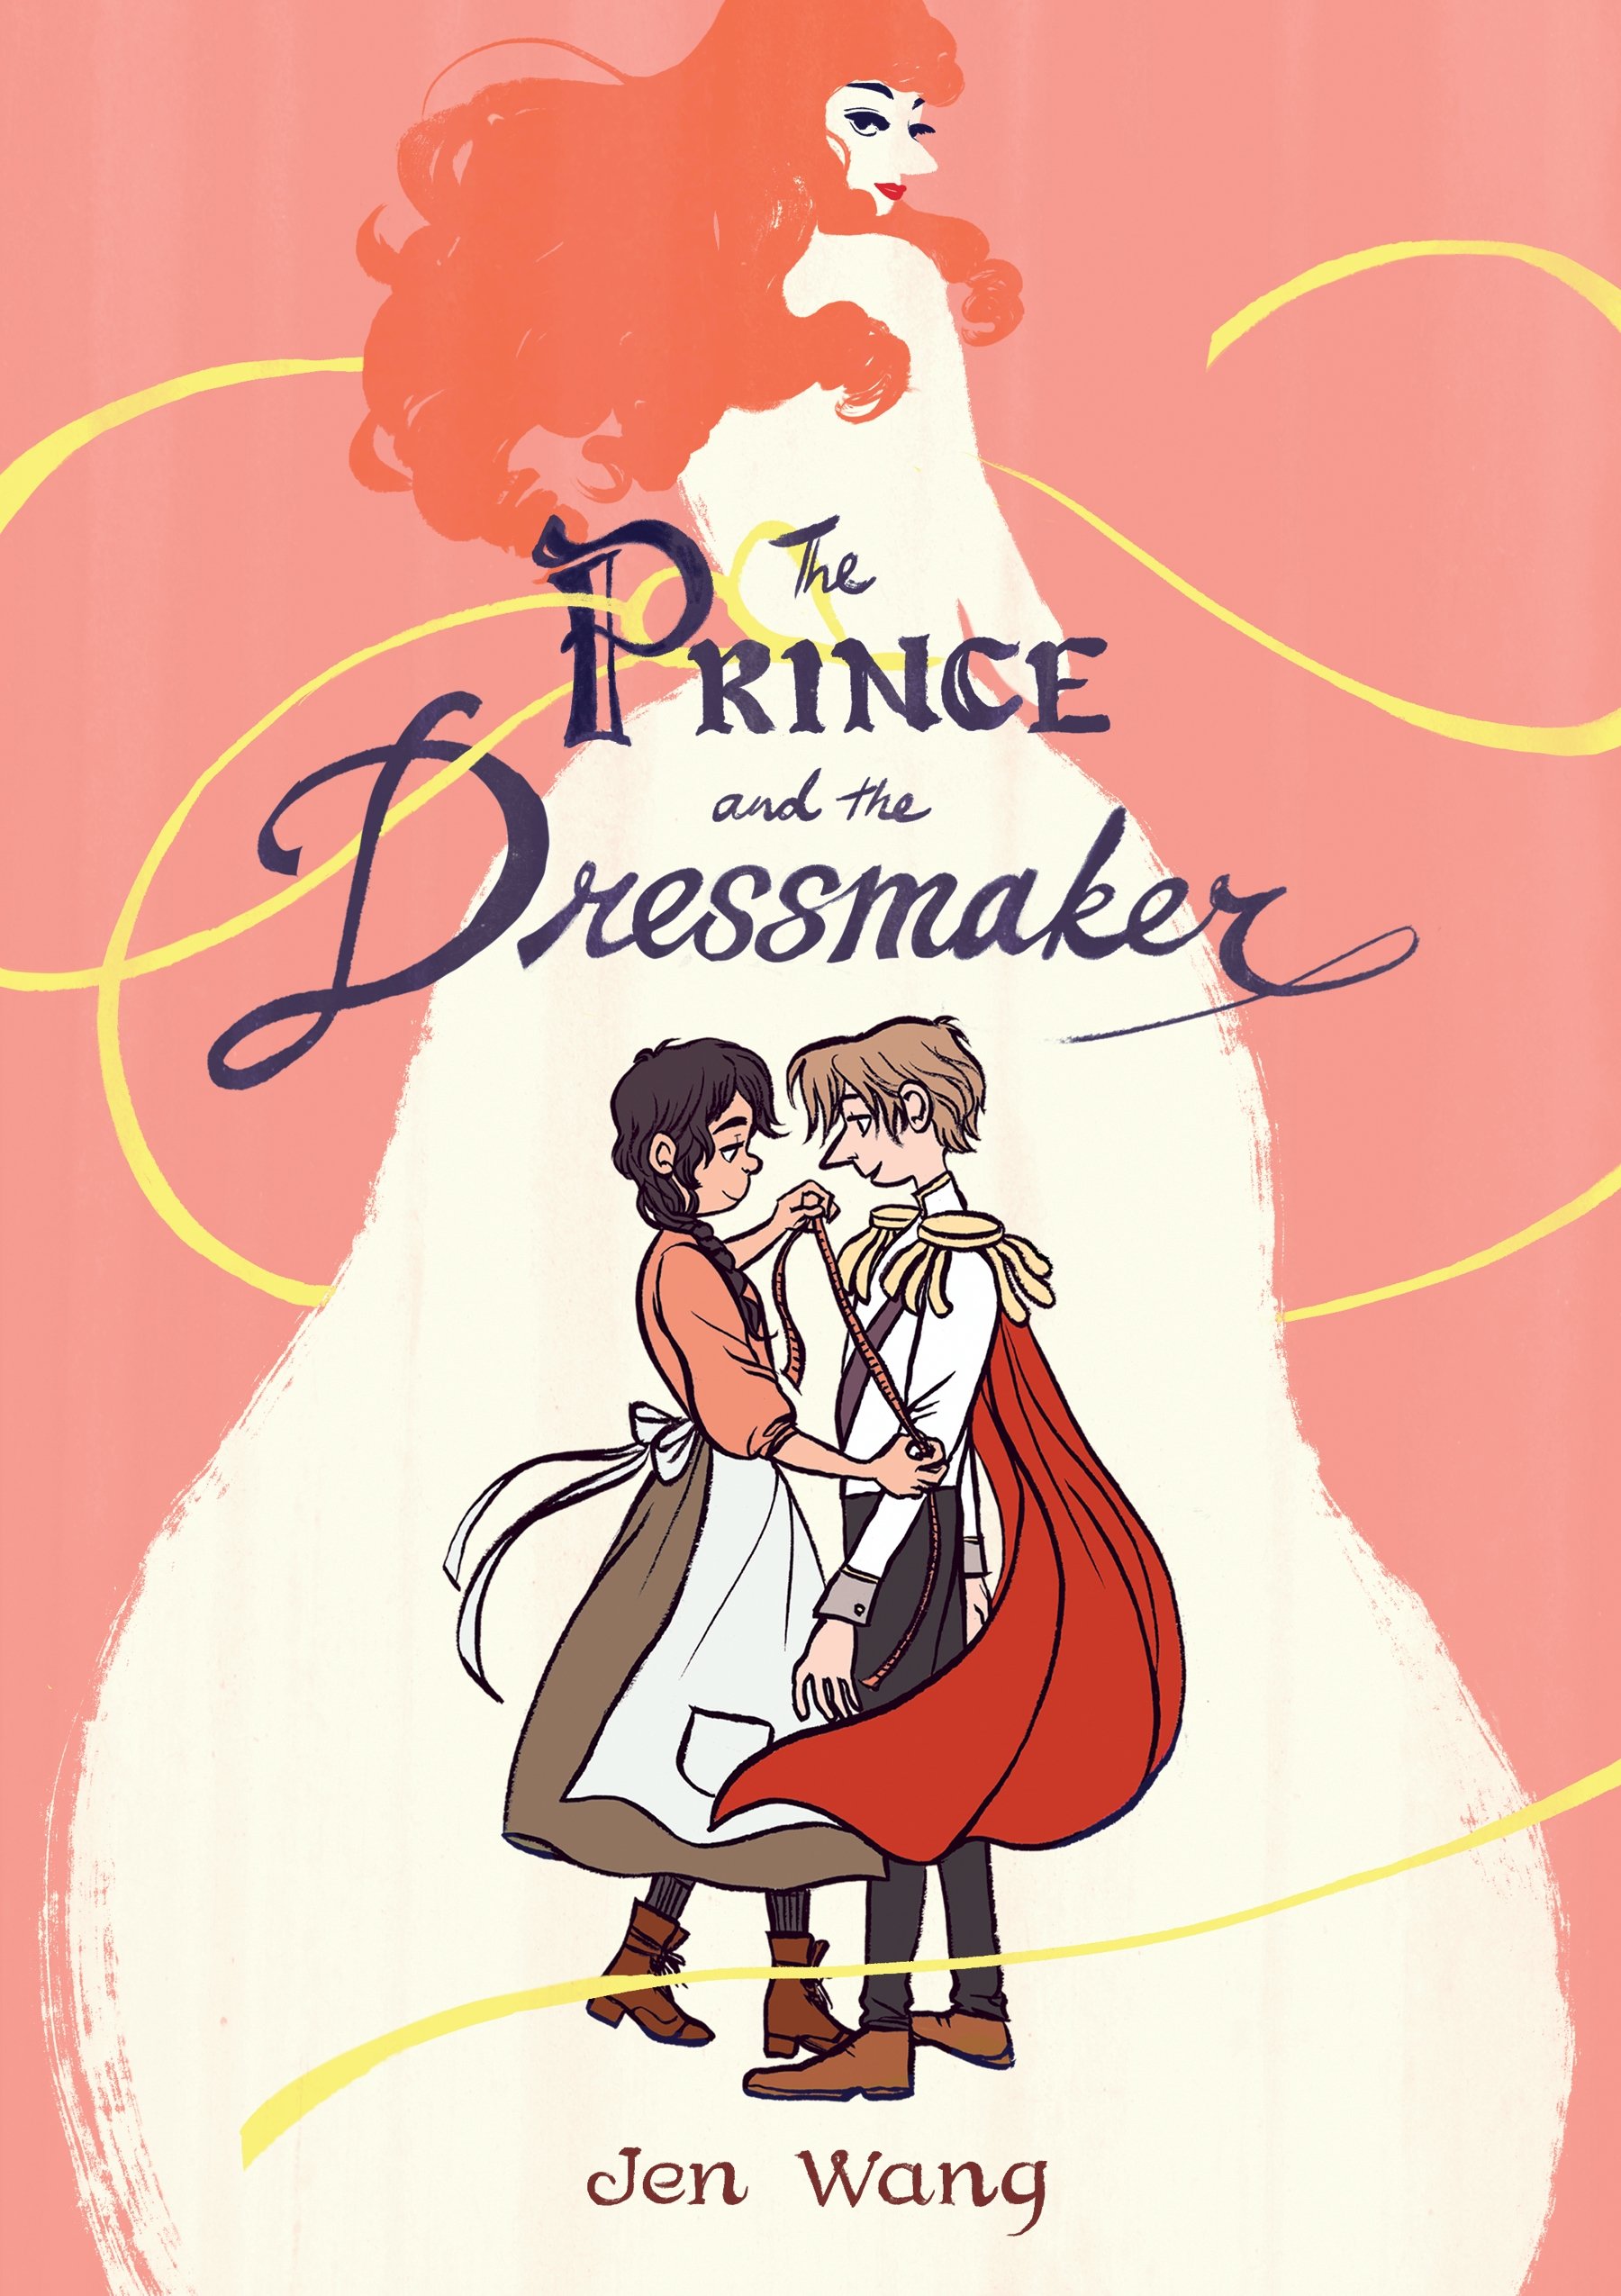 See The Prince and the Dressmaker in Library Catalog